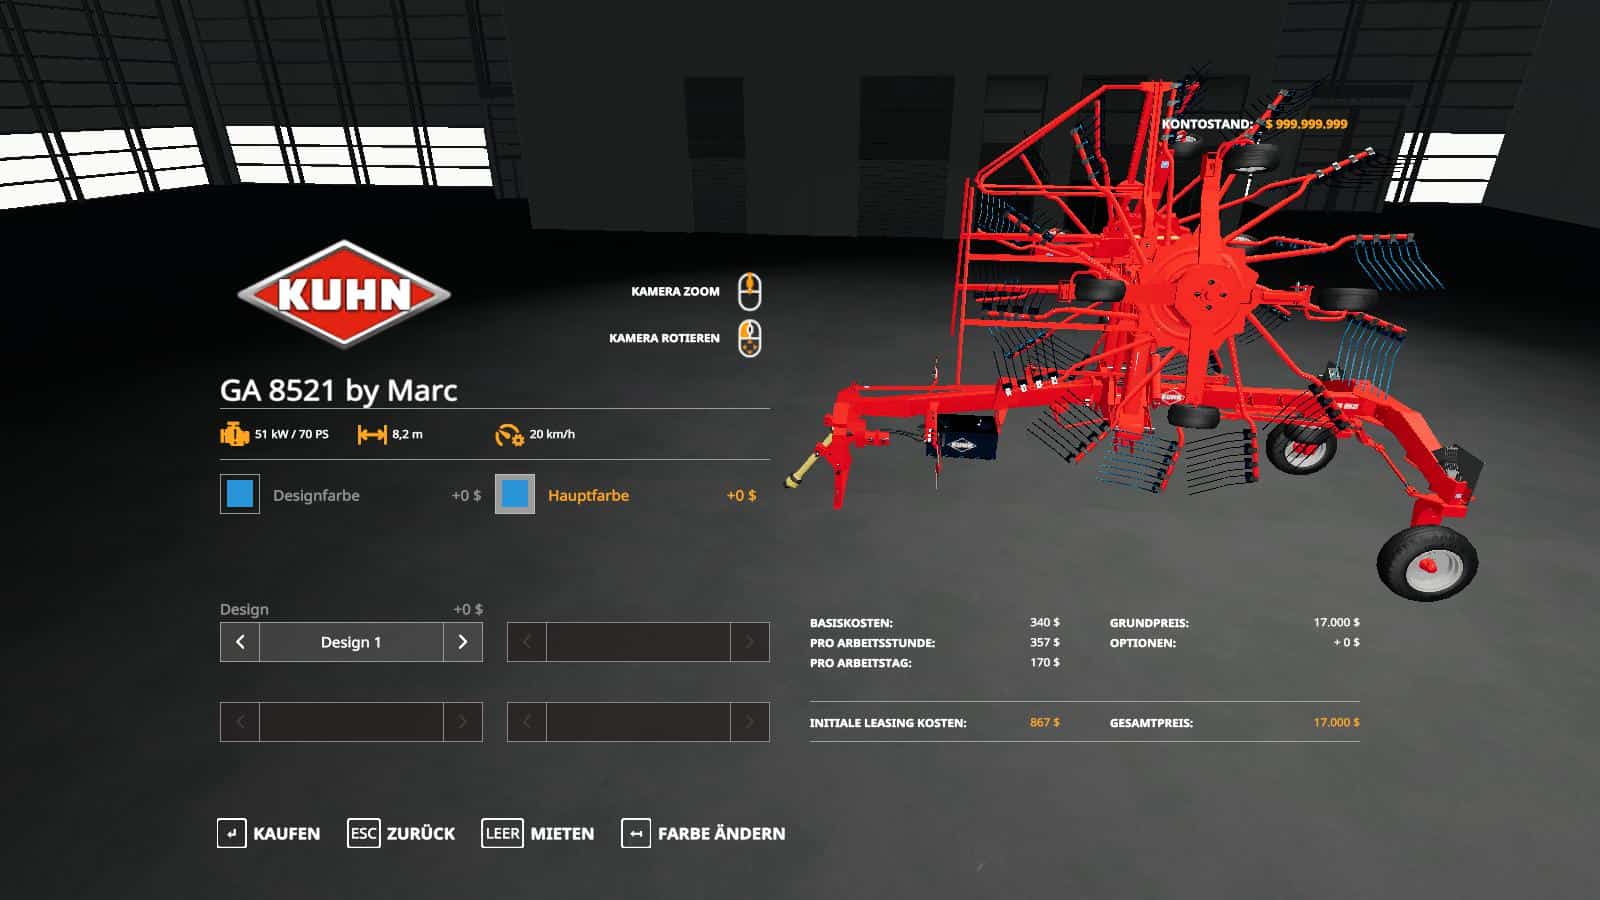 it.they are 3 candy colors pink,blue and red.The work speed on the kuhn is ...